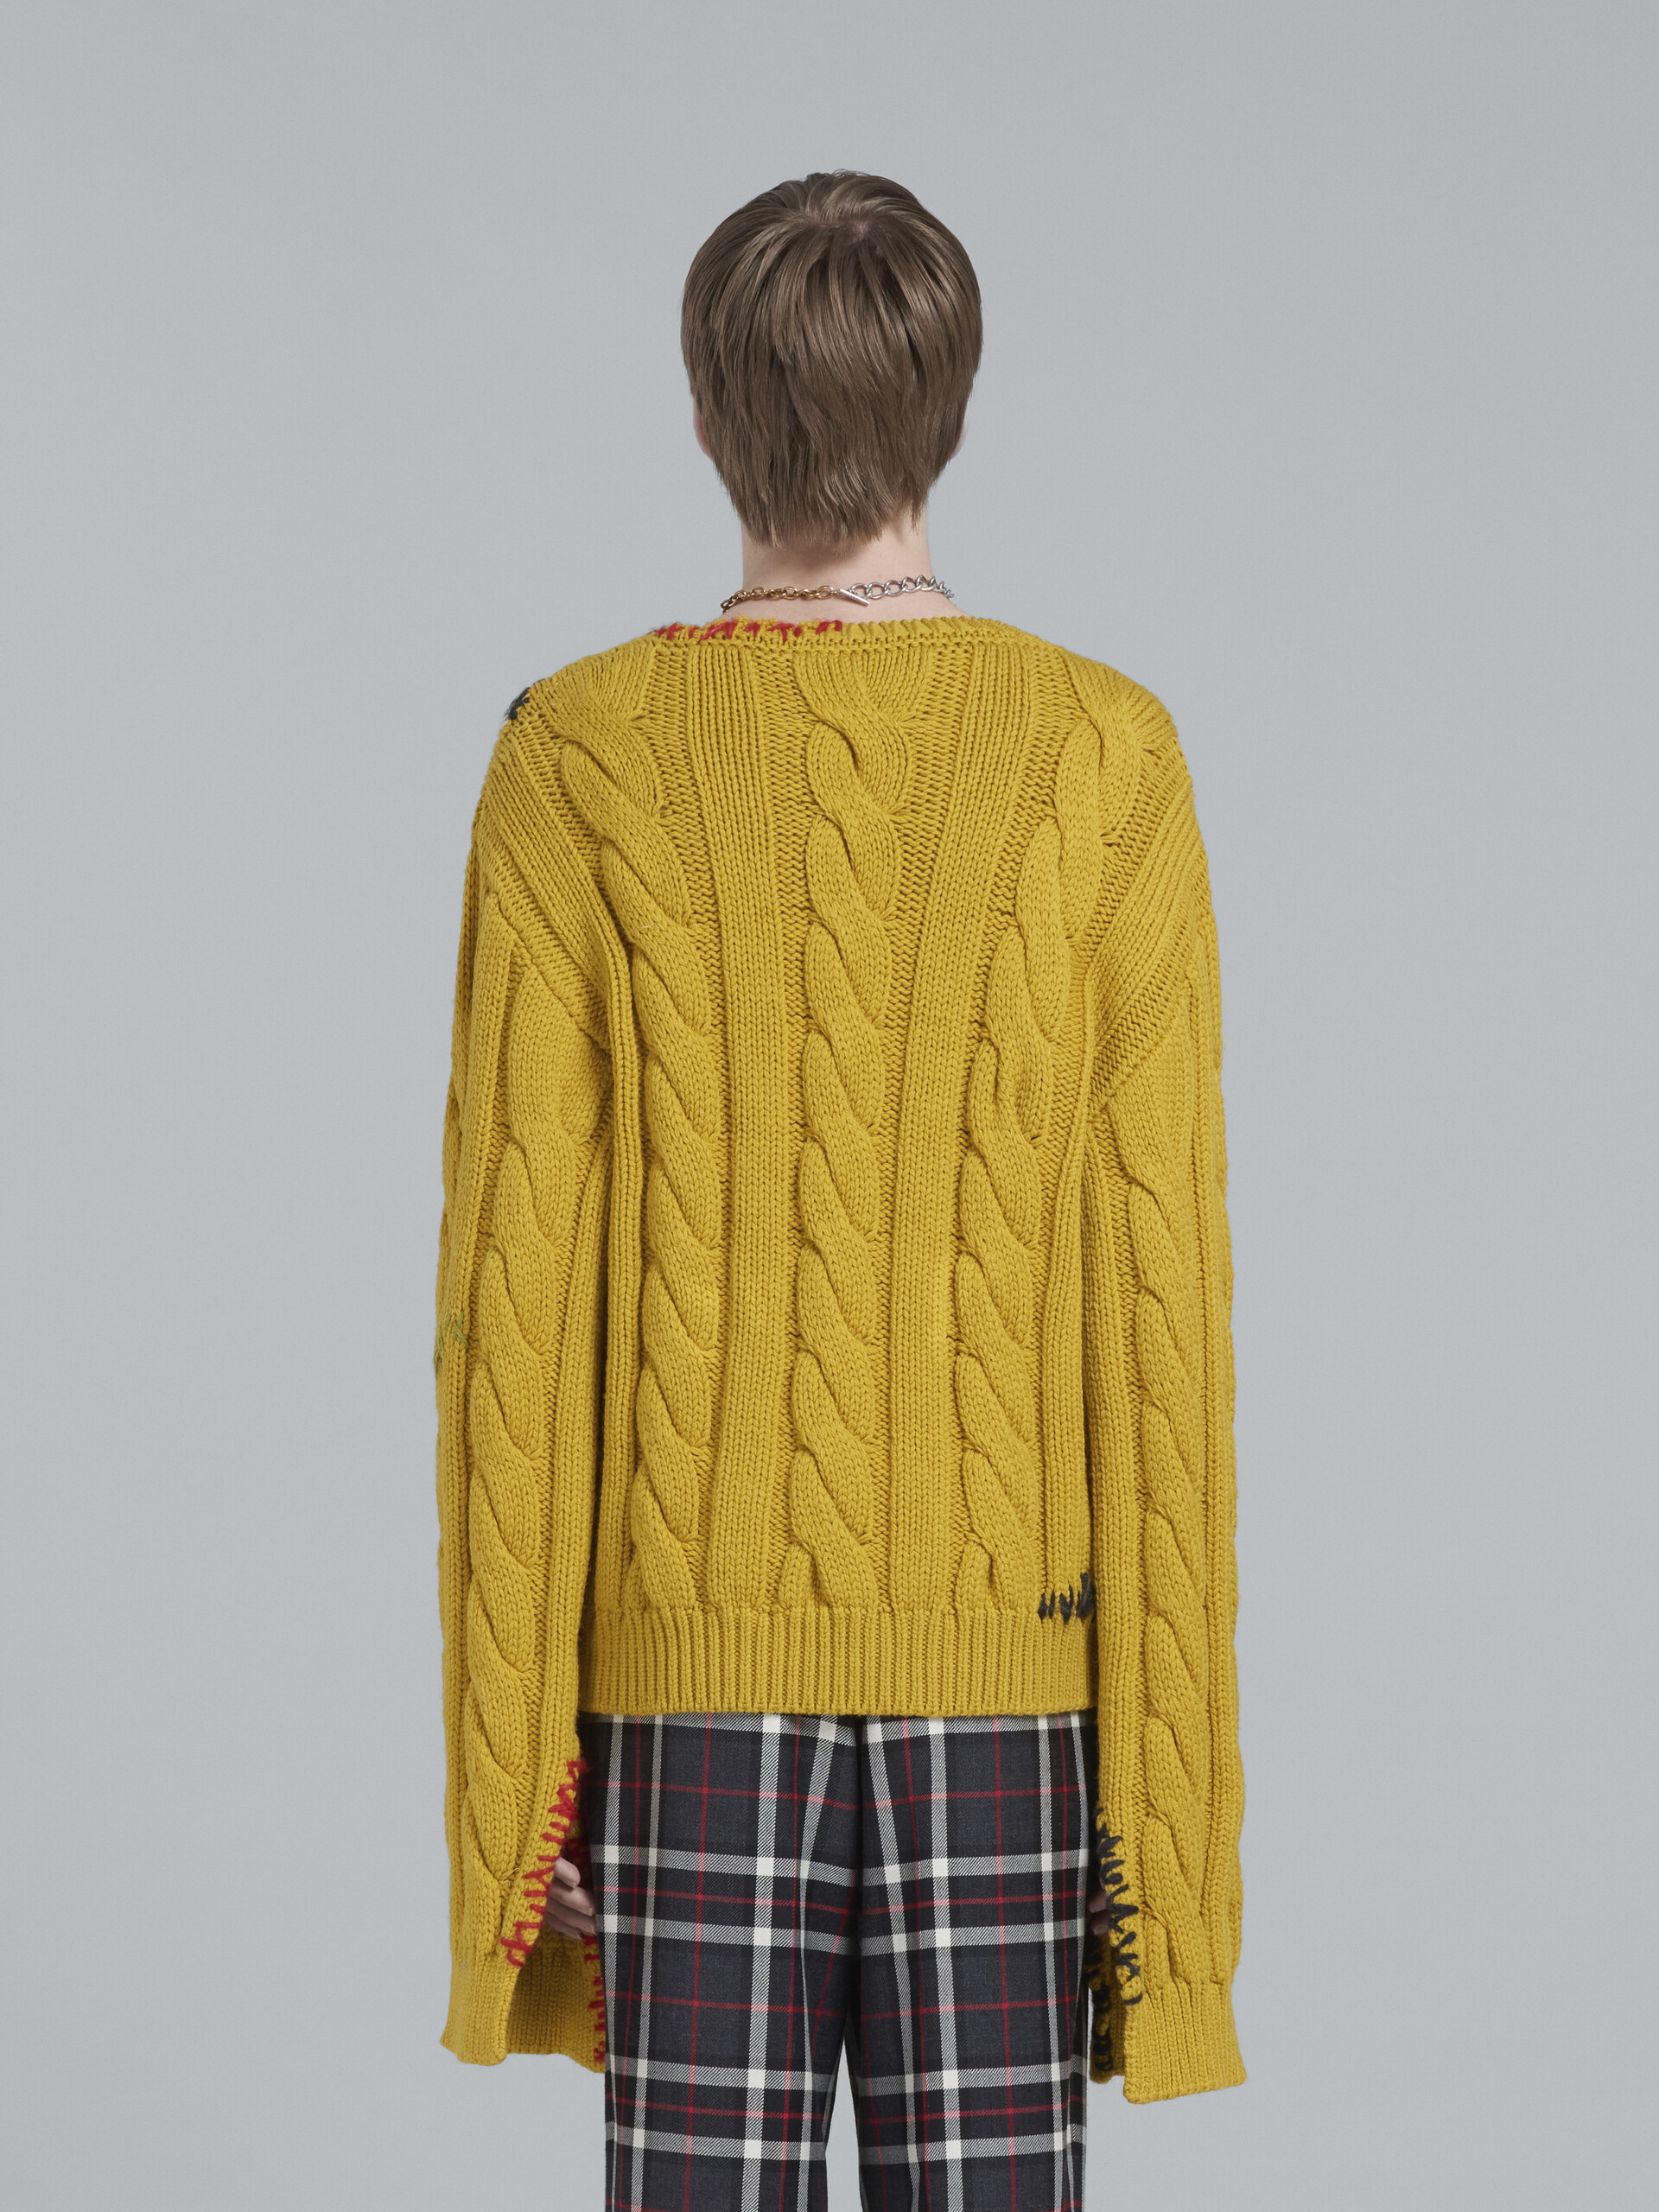 Cedar yellow cable-knit sweater - Pullovers - Image 3